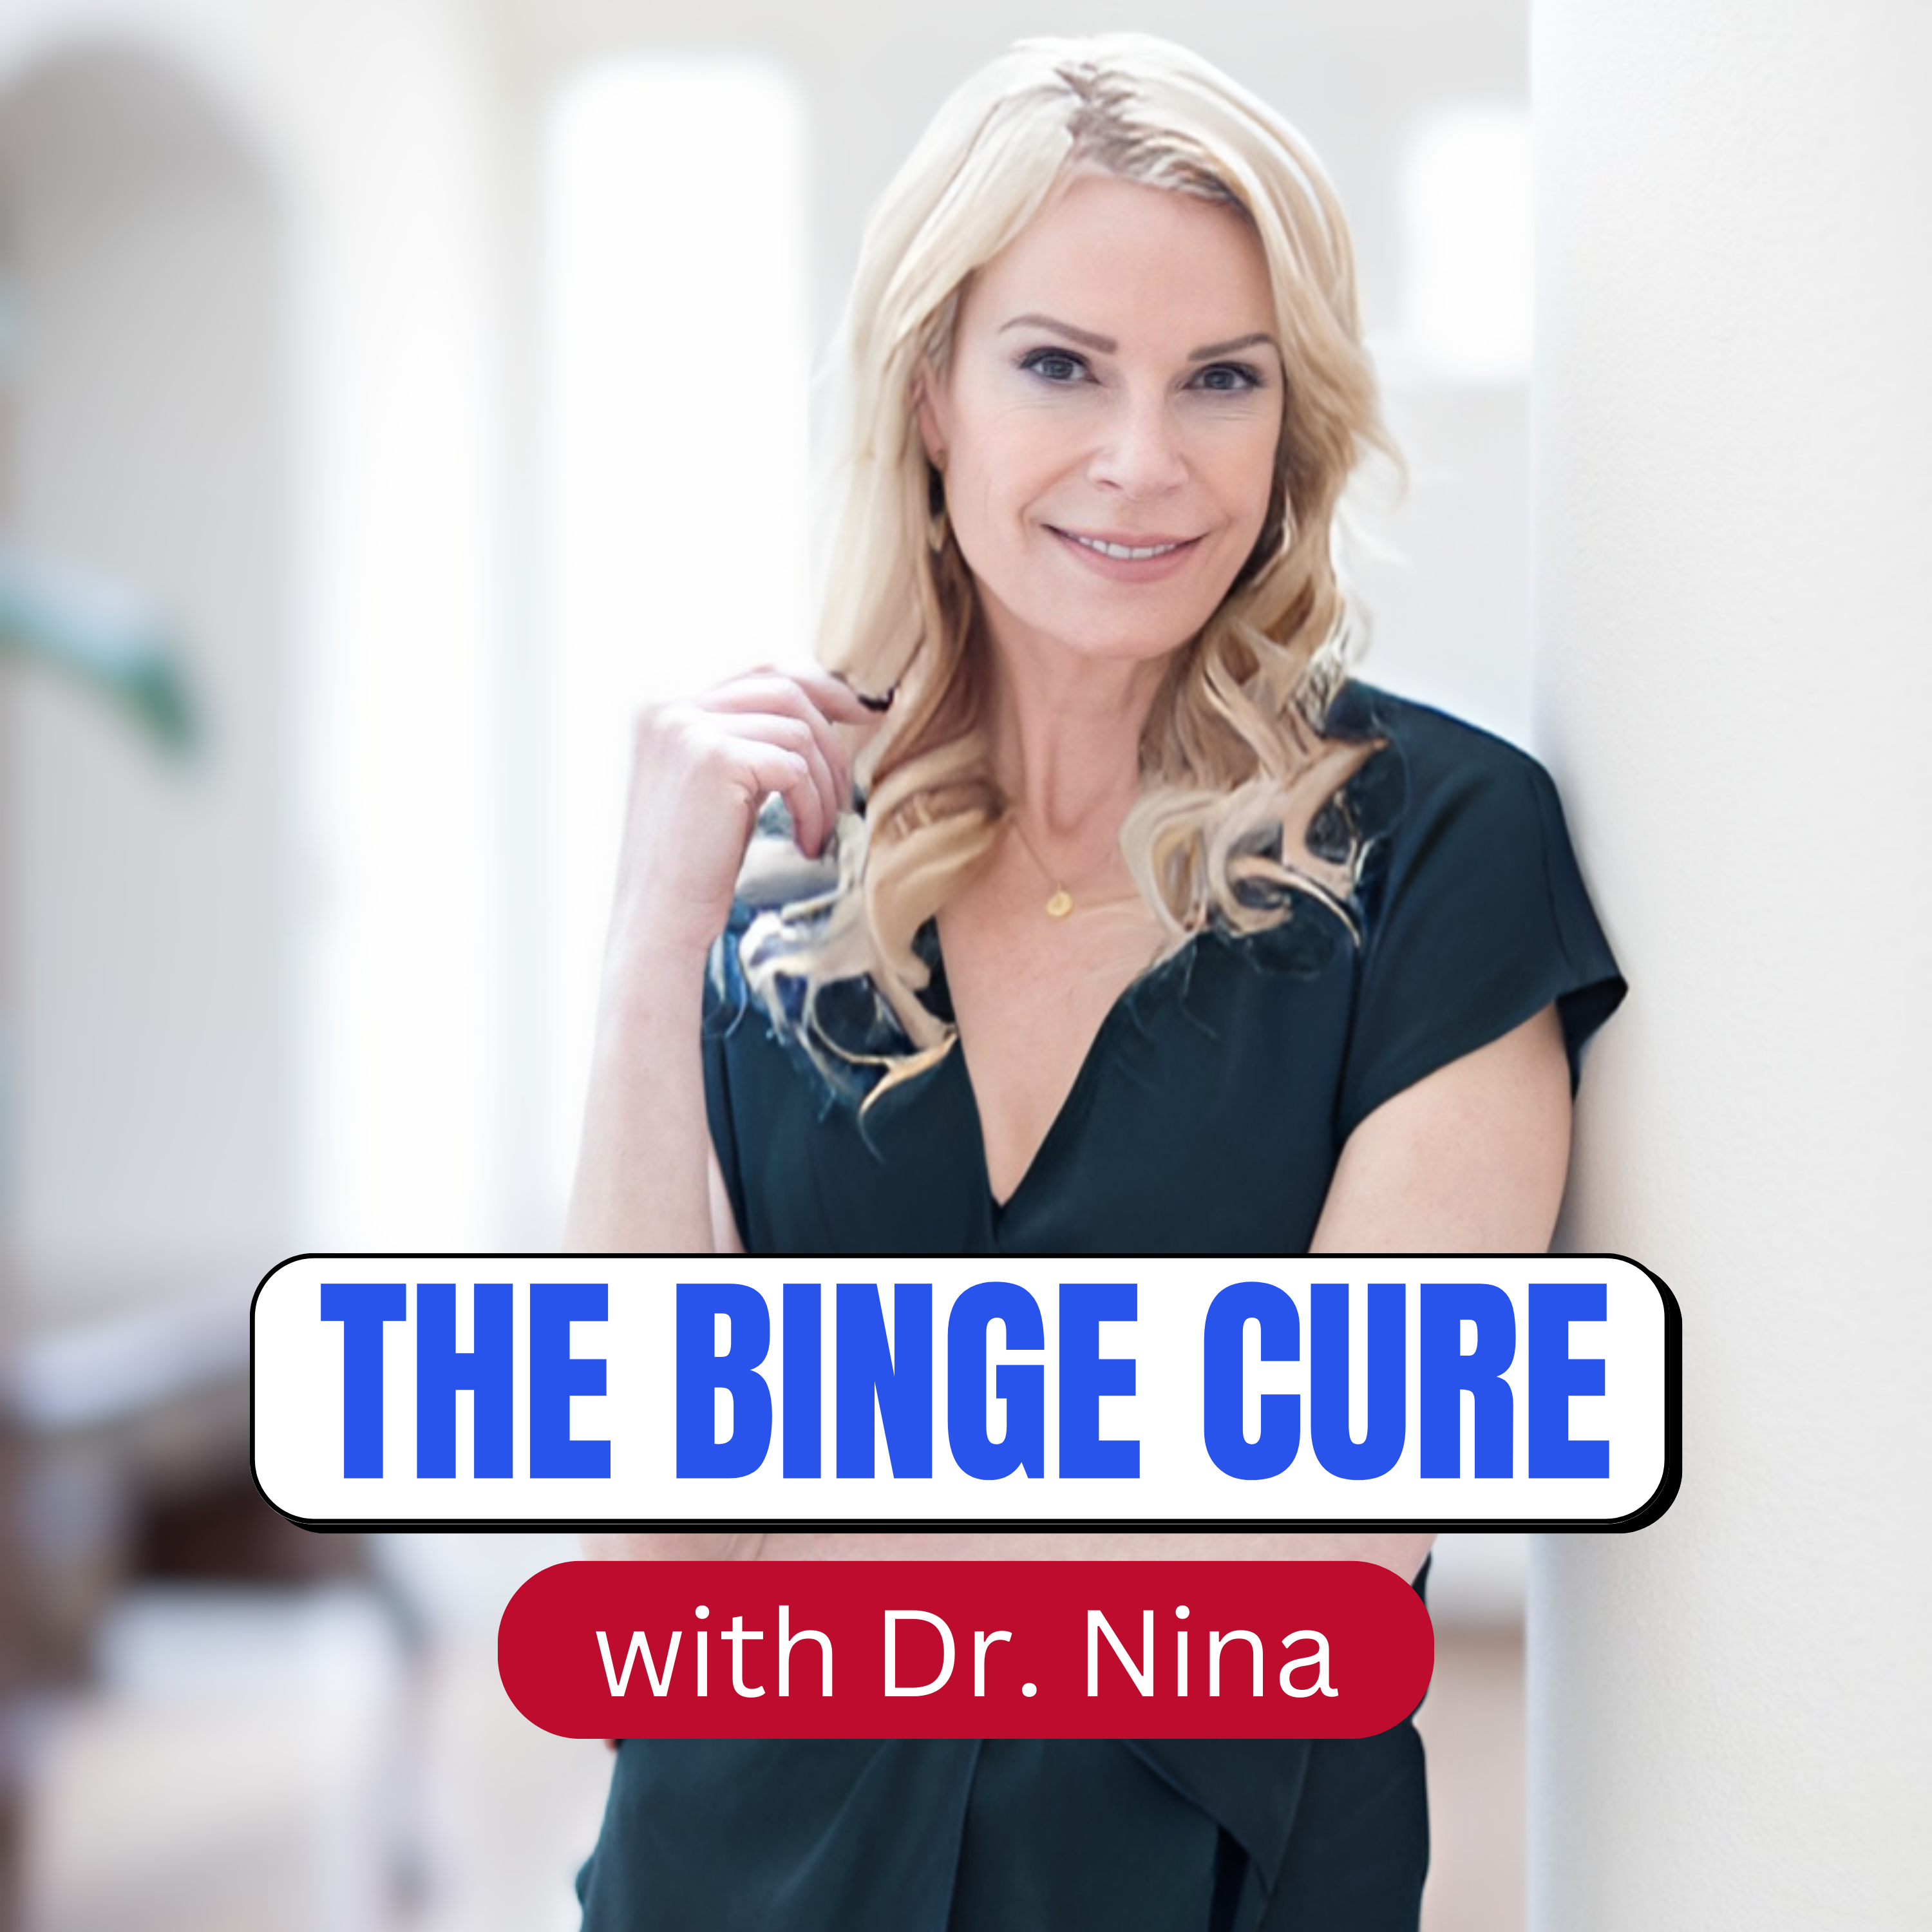 The Binge Cure with Dr. Nina